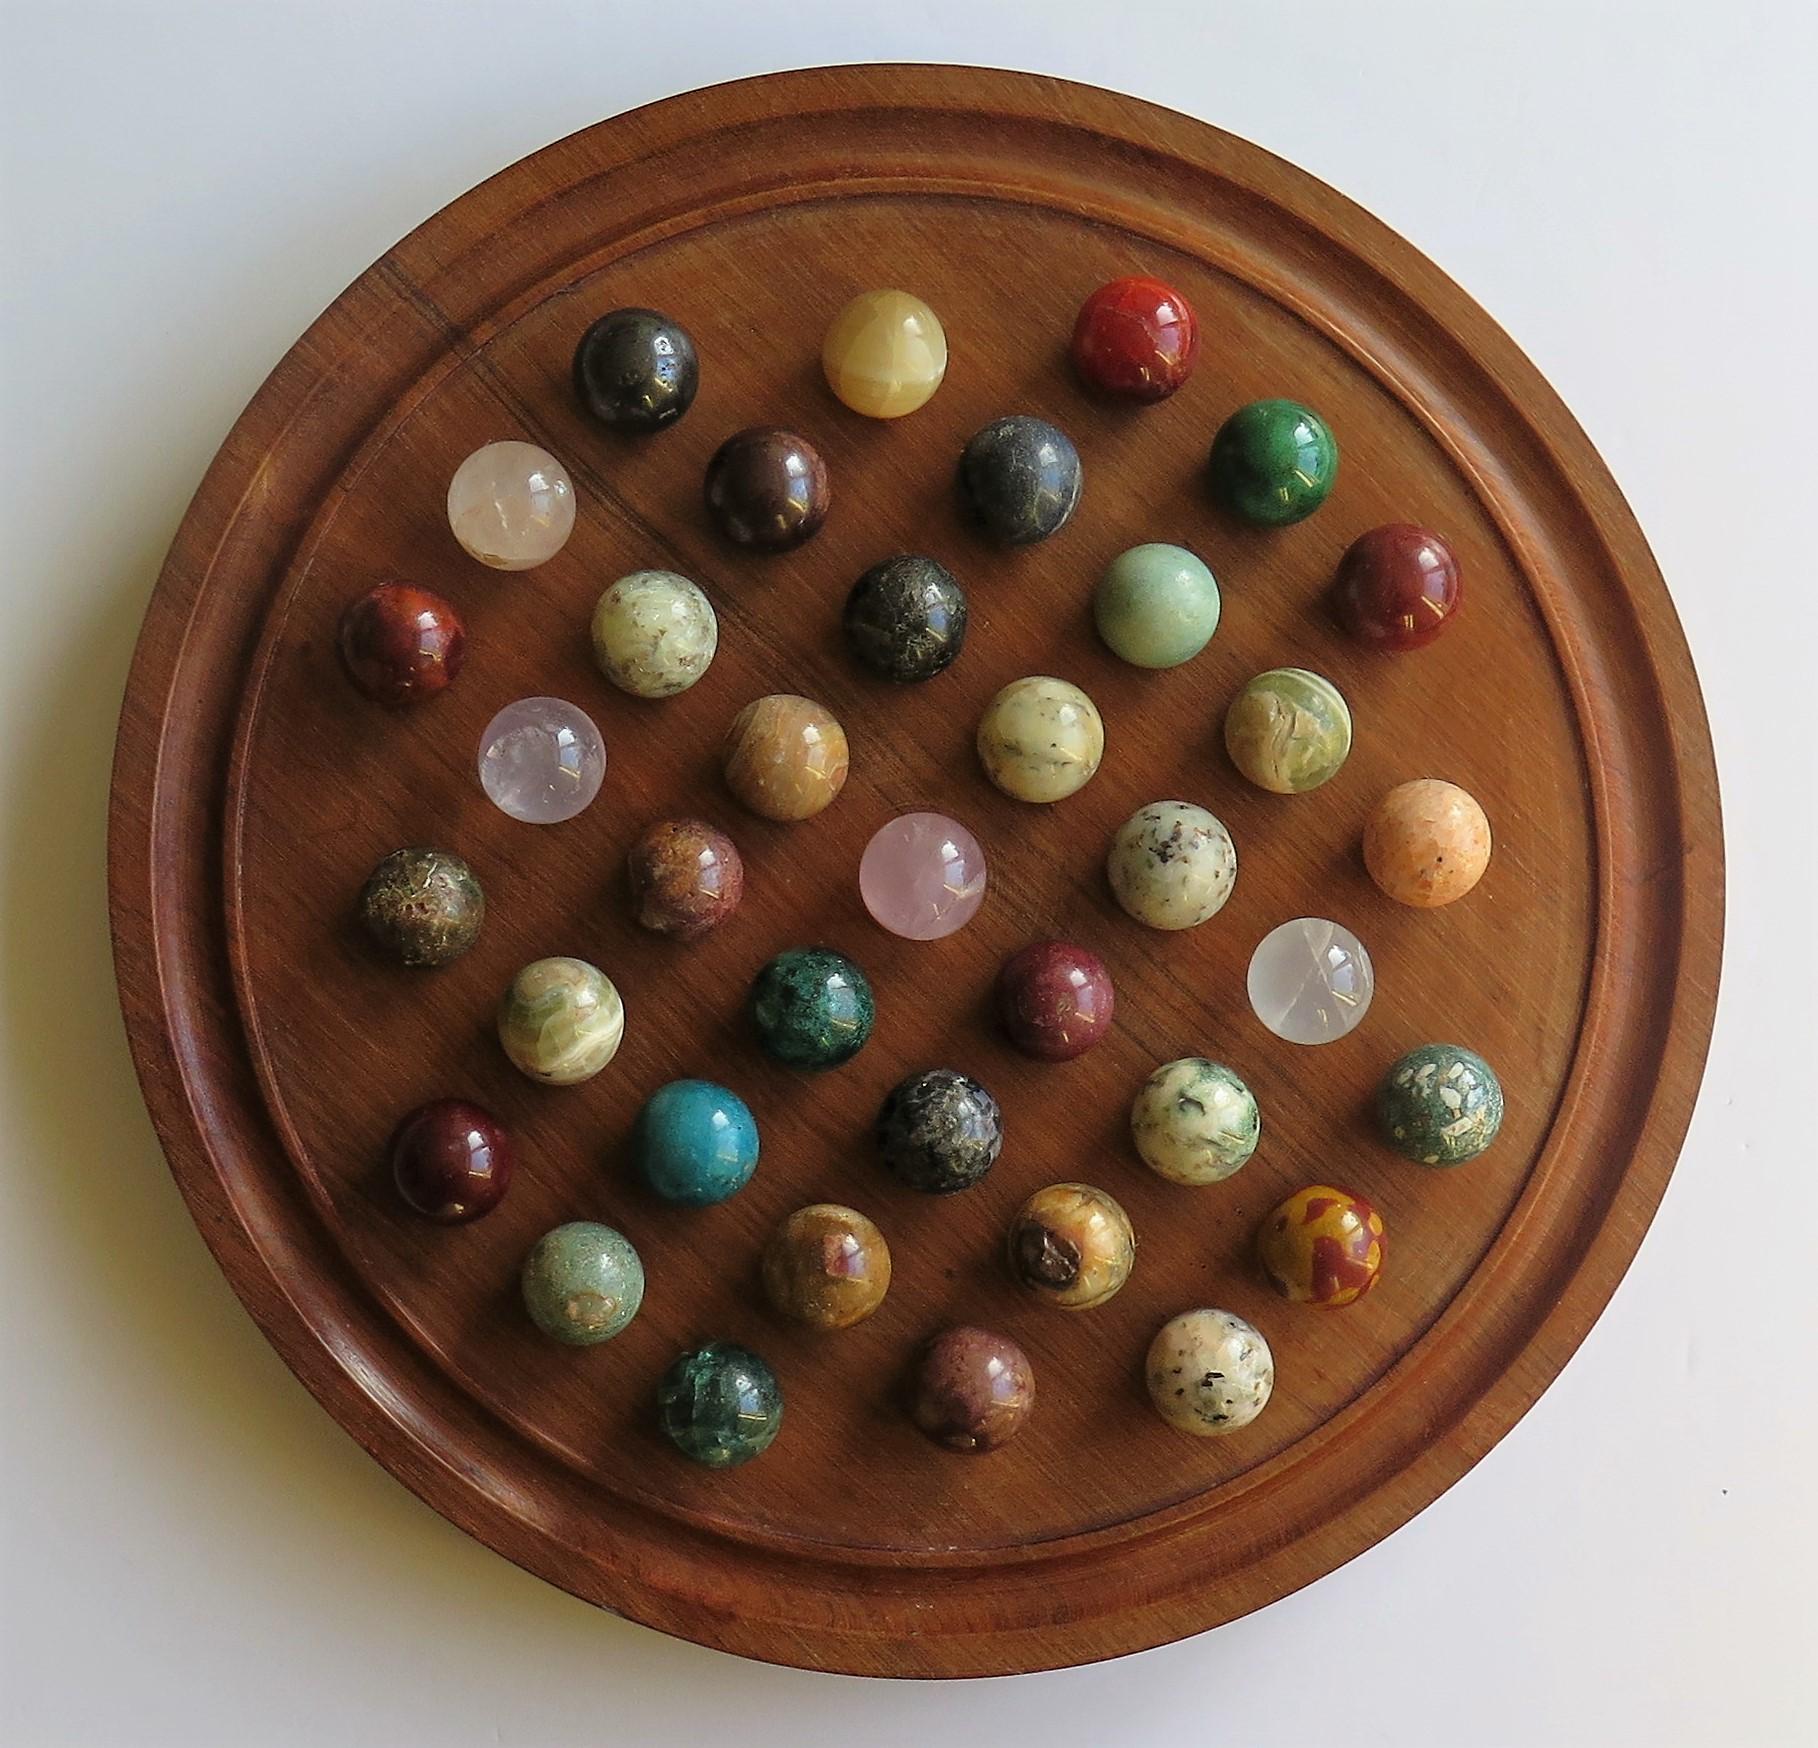 This is a very decorative and complete board game of 37 hole marble solitaire with a large 12.75 inch diameter hardwood board and 37 beautiful individual mainly mineral or agate stone and some glass marbles, which we date to the early 20th century,